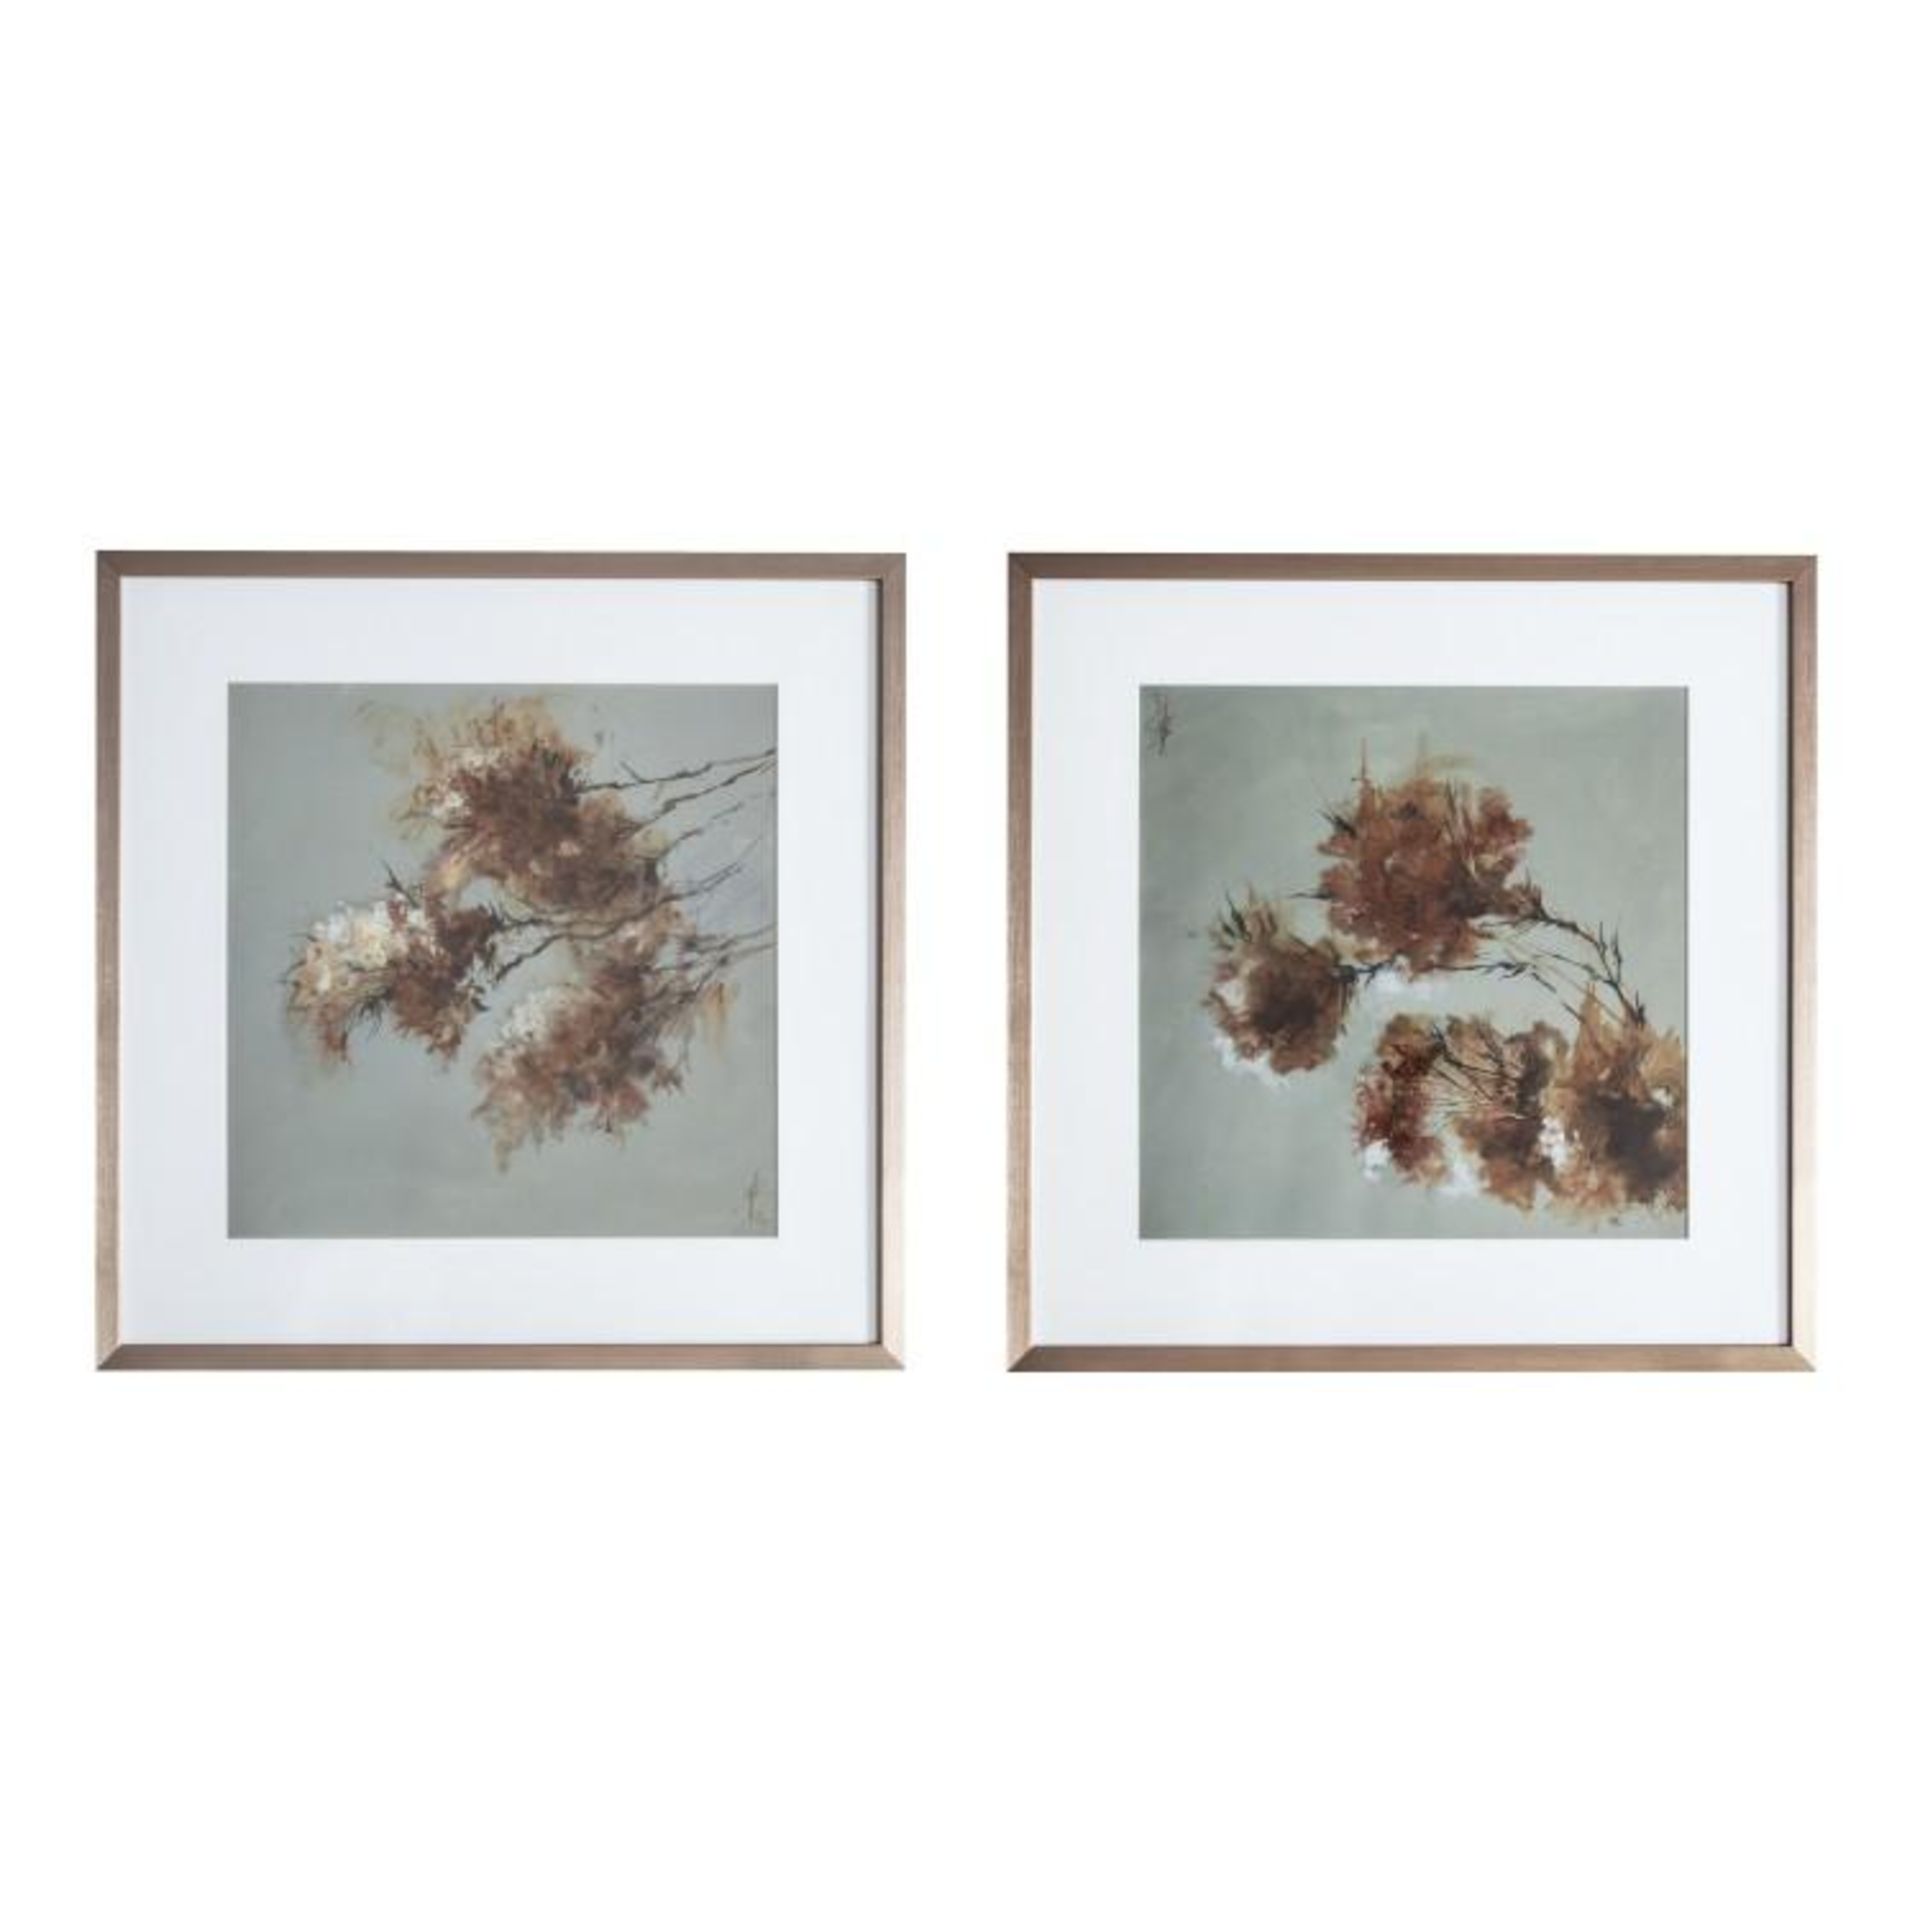 Autumn floral framed art Set of 2 590 x 35 x 590mm Add elegance to the home with the Autumn Floral